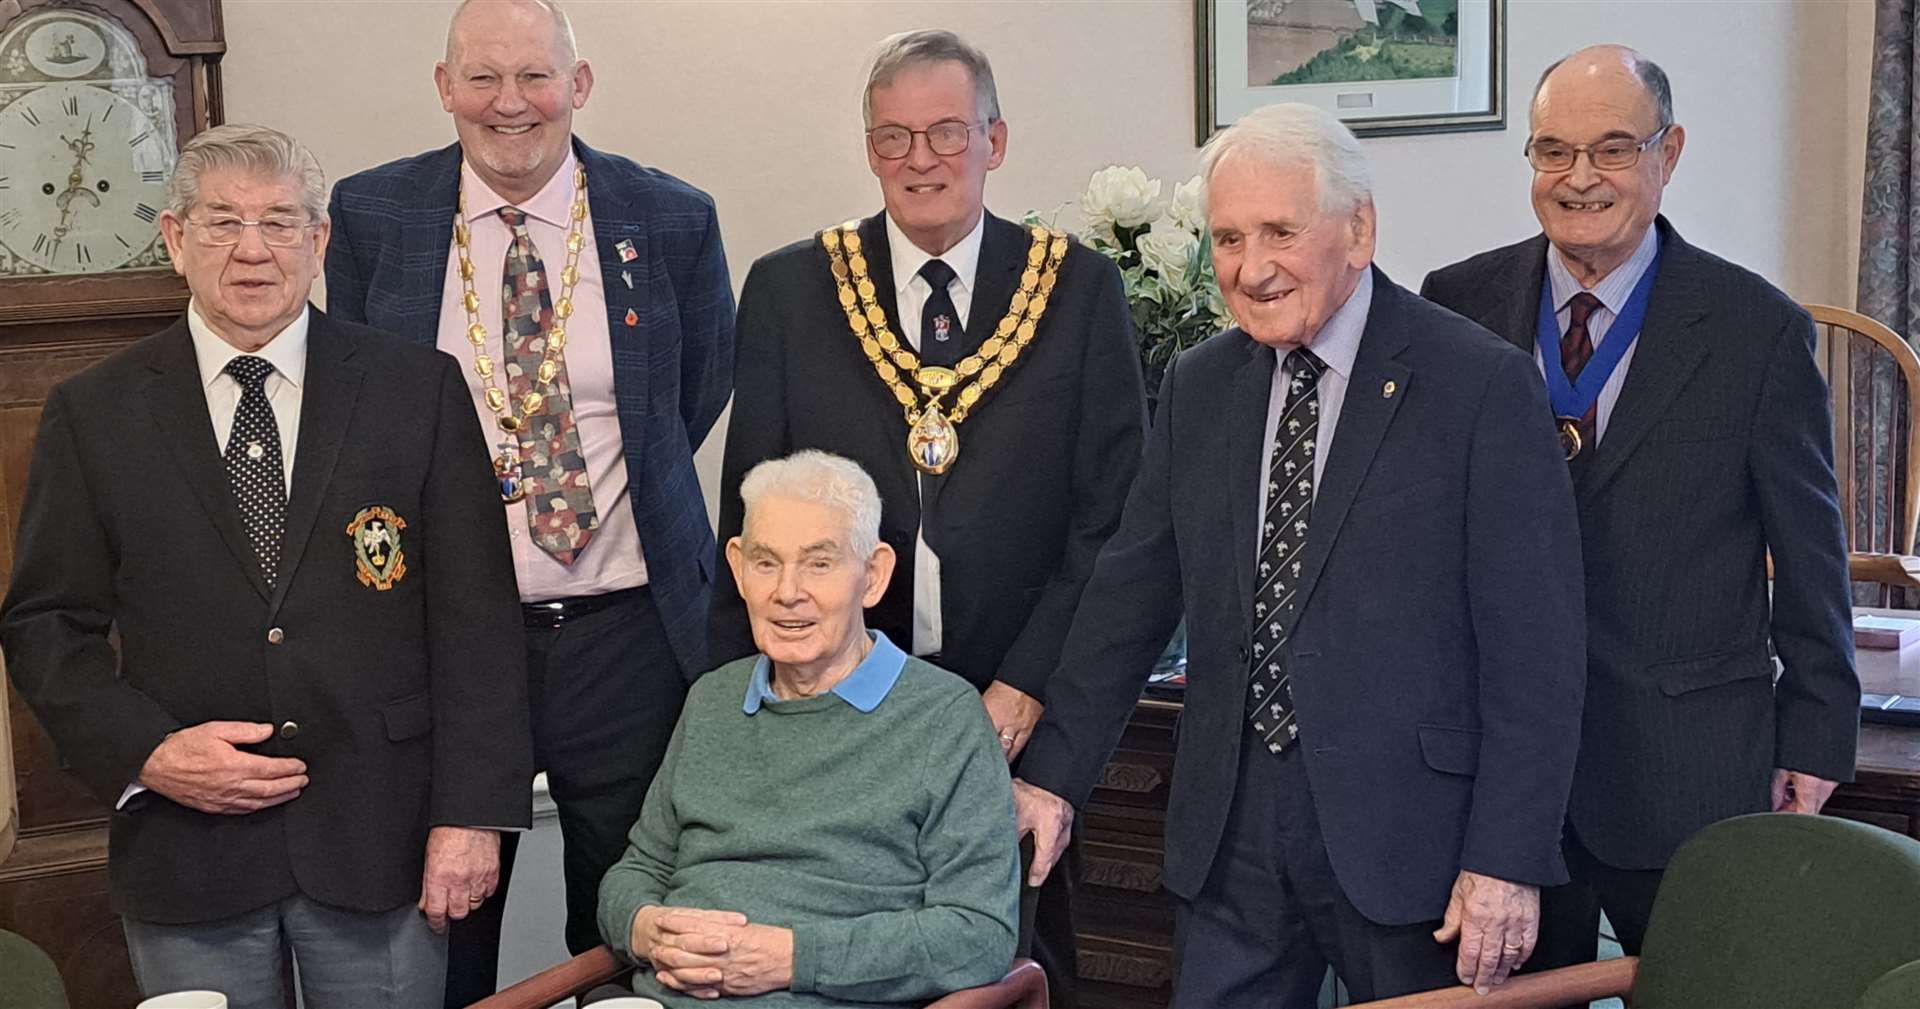 From left: Terry Quinlan, TMBC Armed Forces Champion Cllr Steve Hammond, Ray Porter, the Mayor James Lark, Ian Kury and Armed Forces Champion Cllr Dave Davis